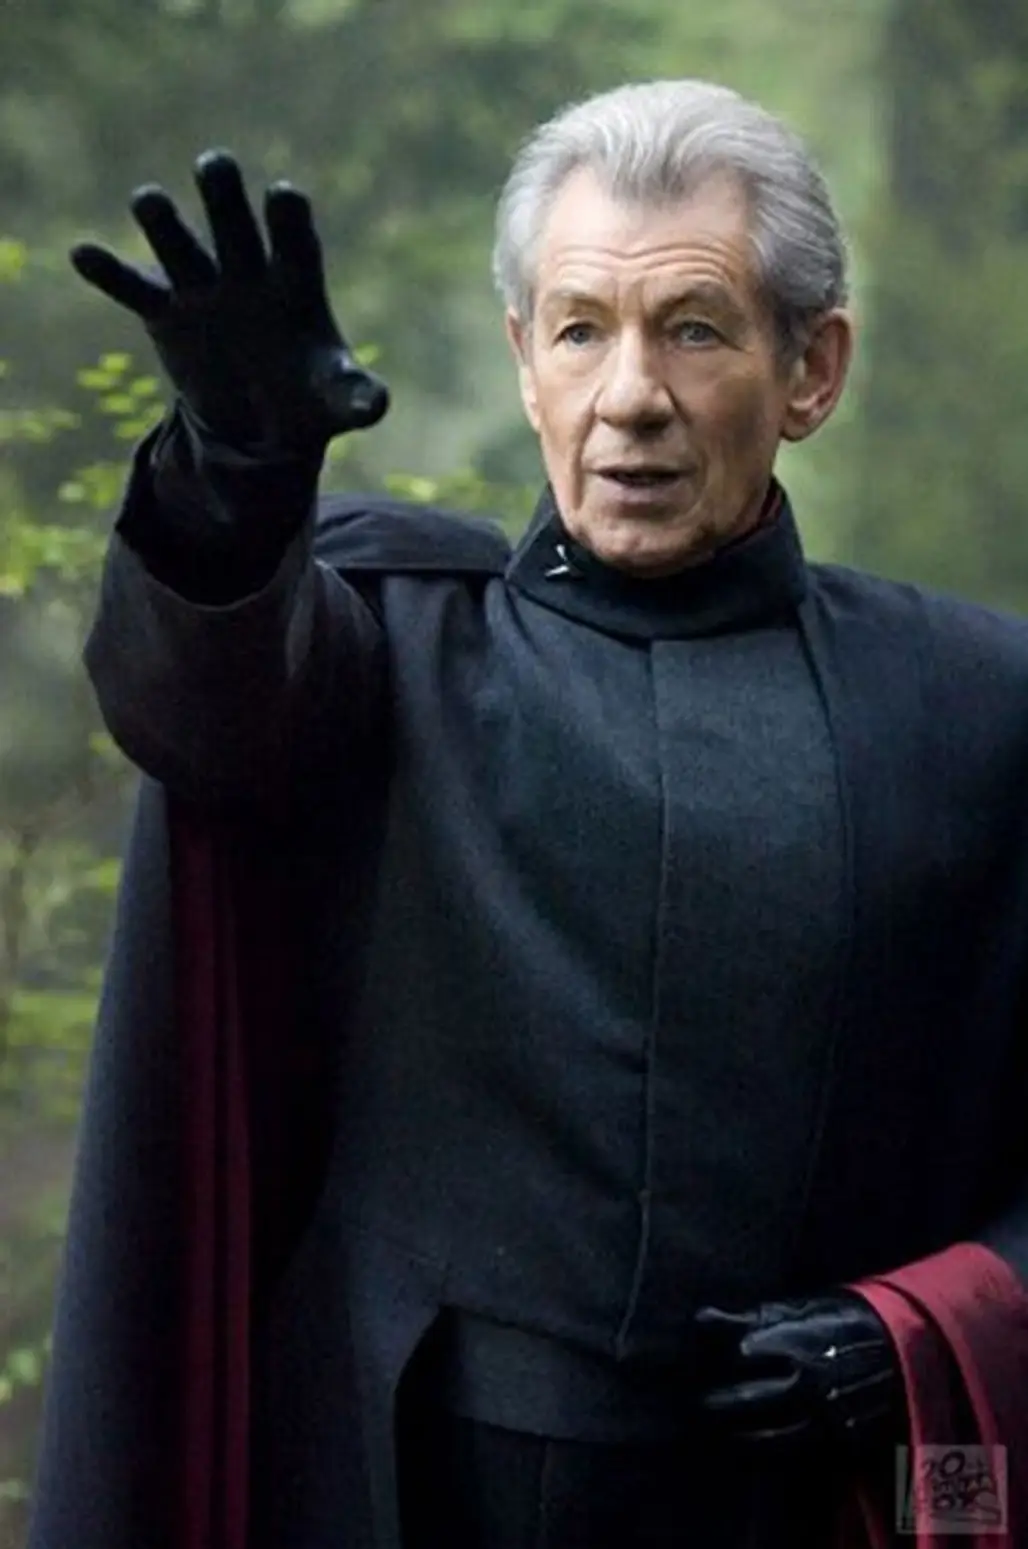 Magneto from the X-Men Series